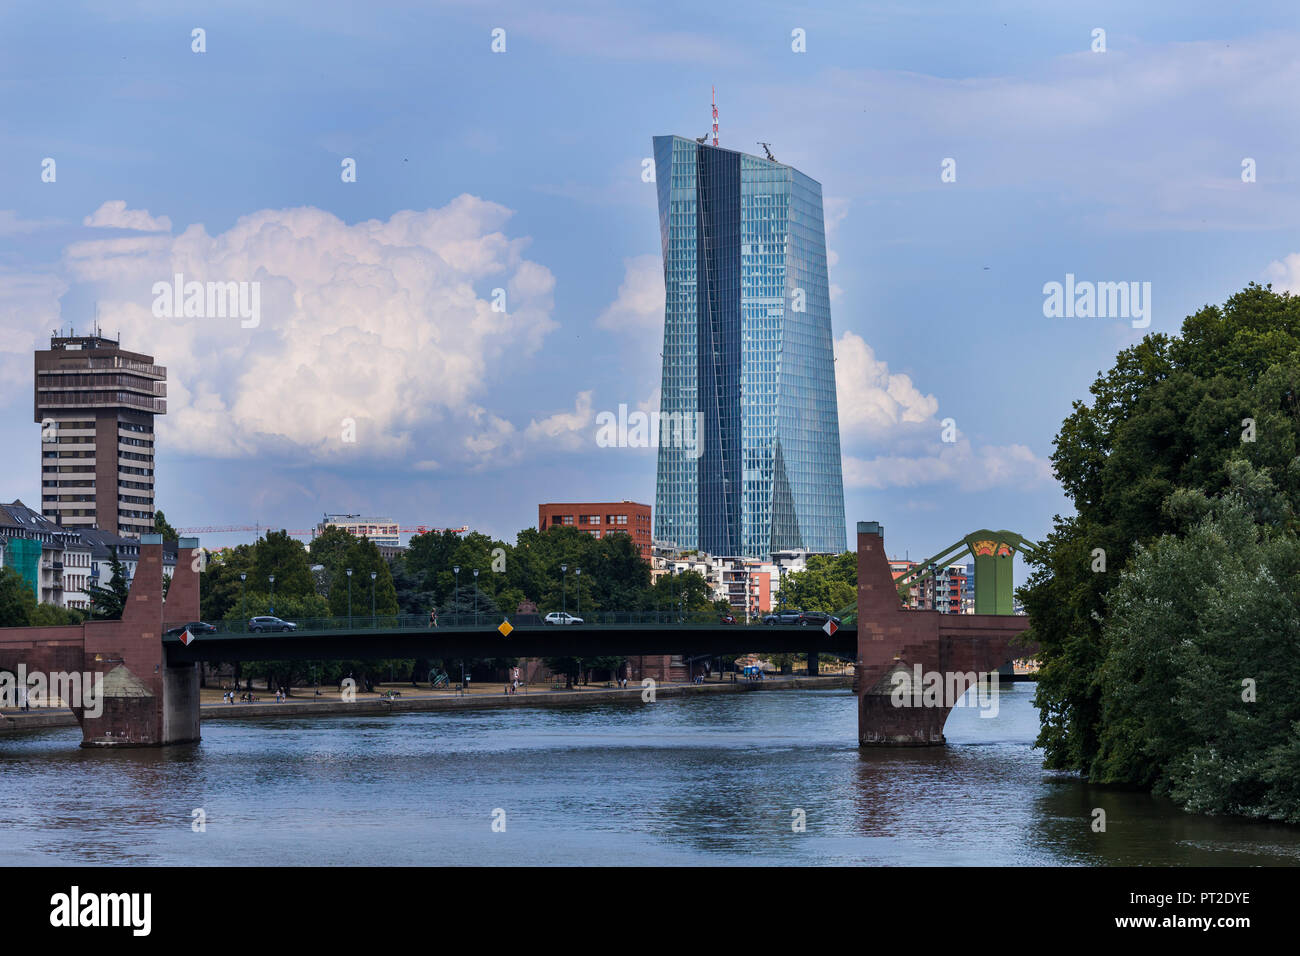 Germany, Frankfurt, view to European Central Bank with Old Bridge over Main River in the foreground Stock Photo